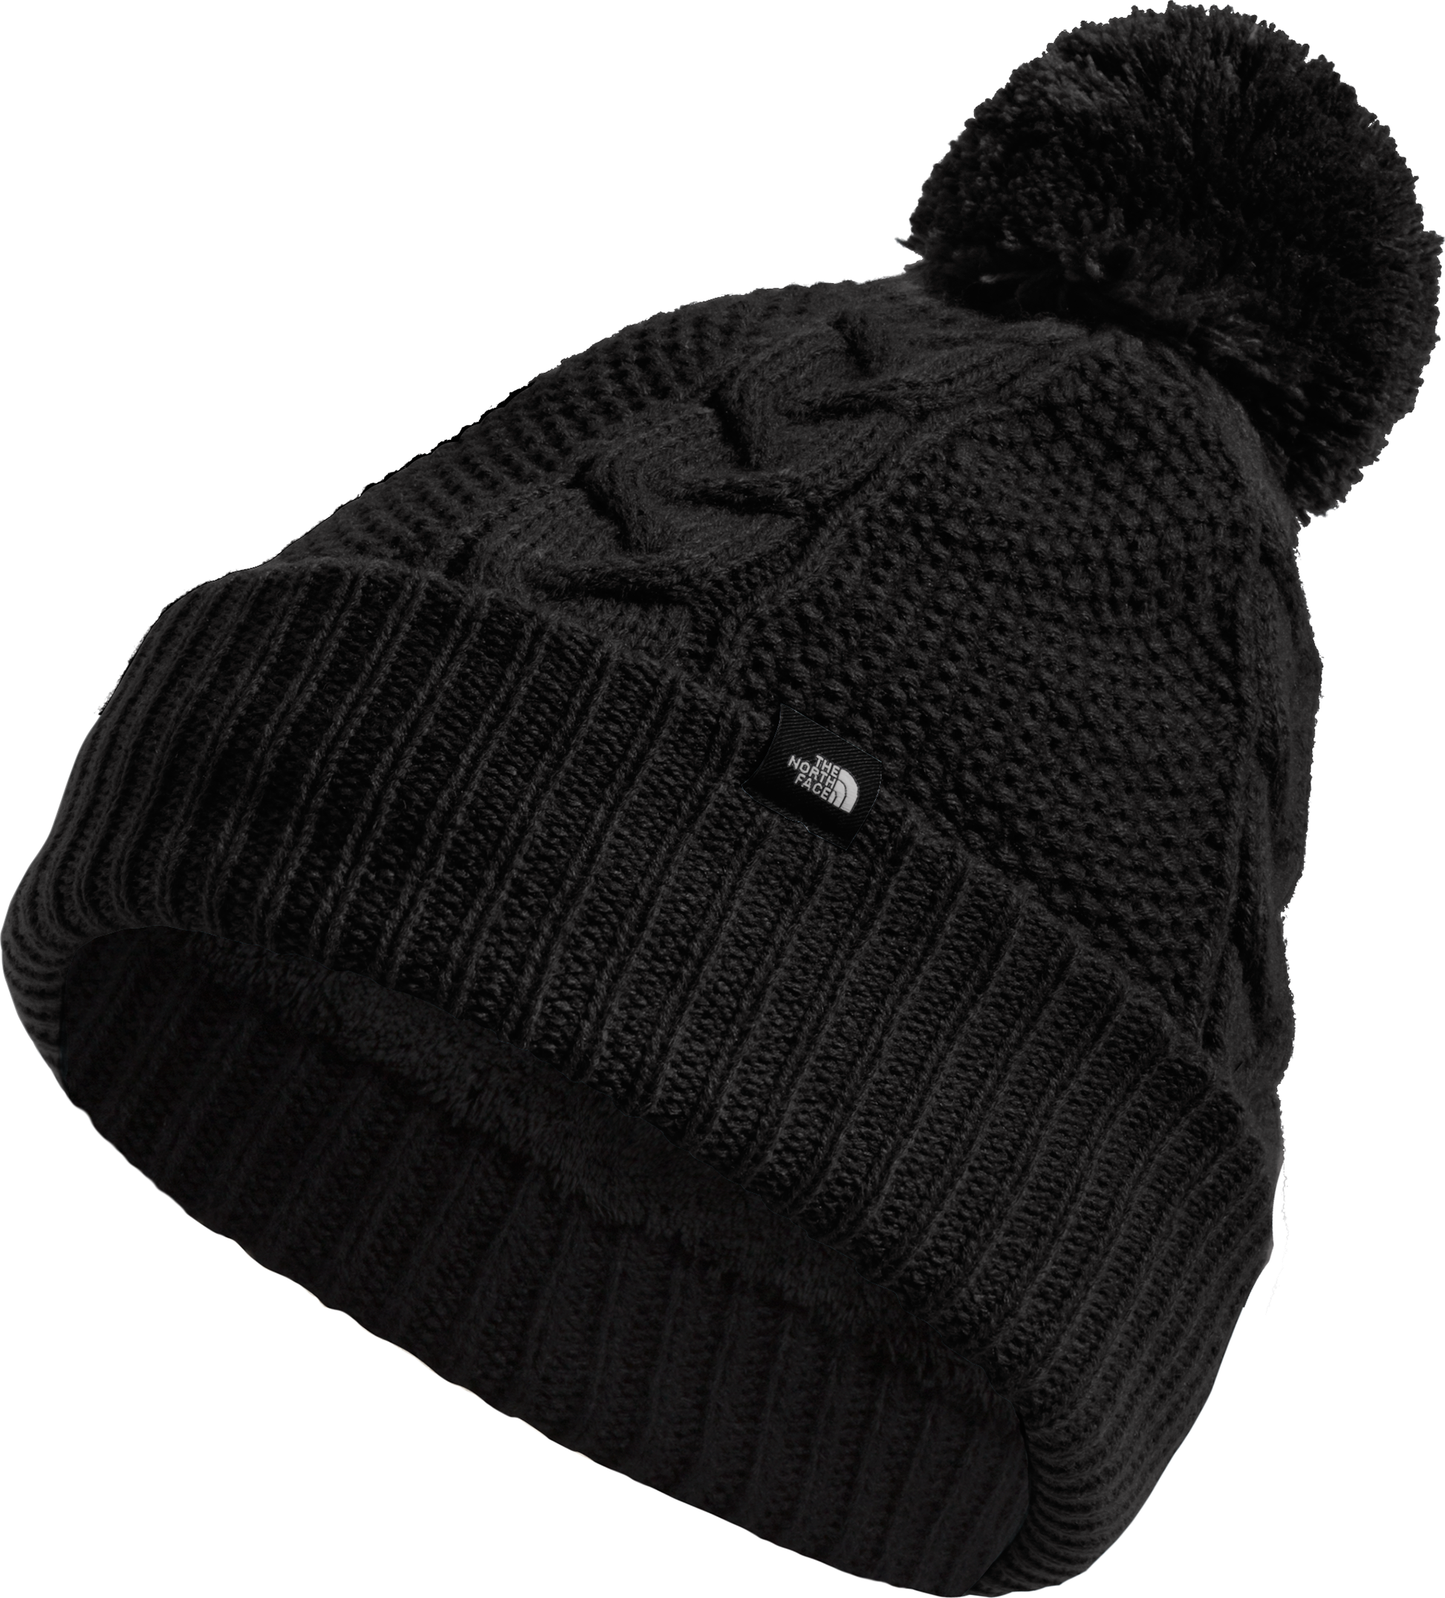 The North Face Accessories Women's Cable Minna Beanie Tnf Black